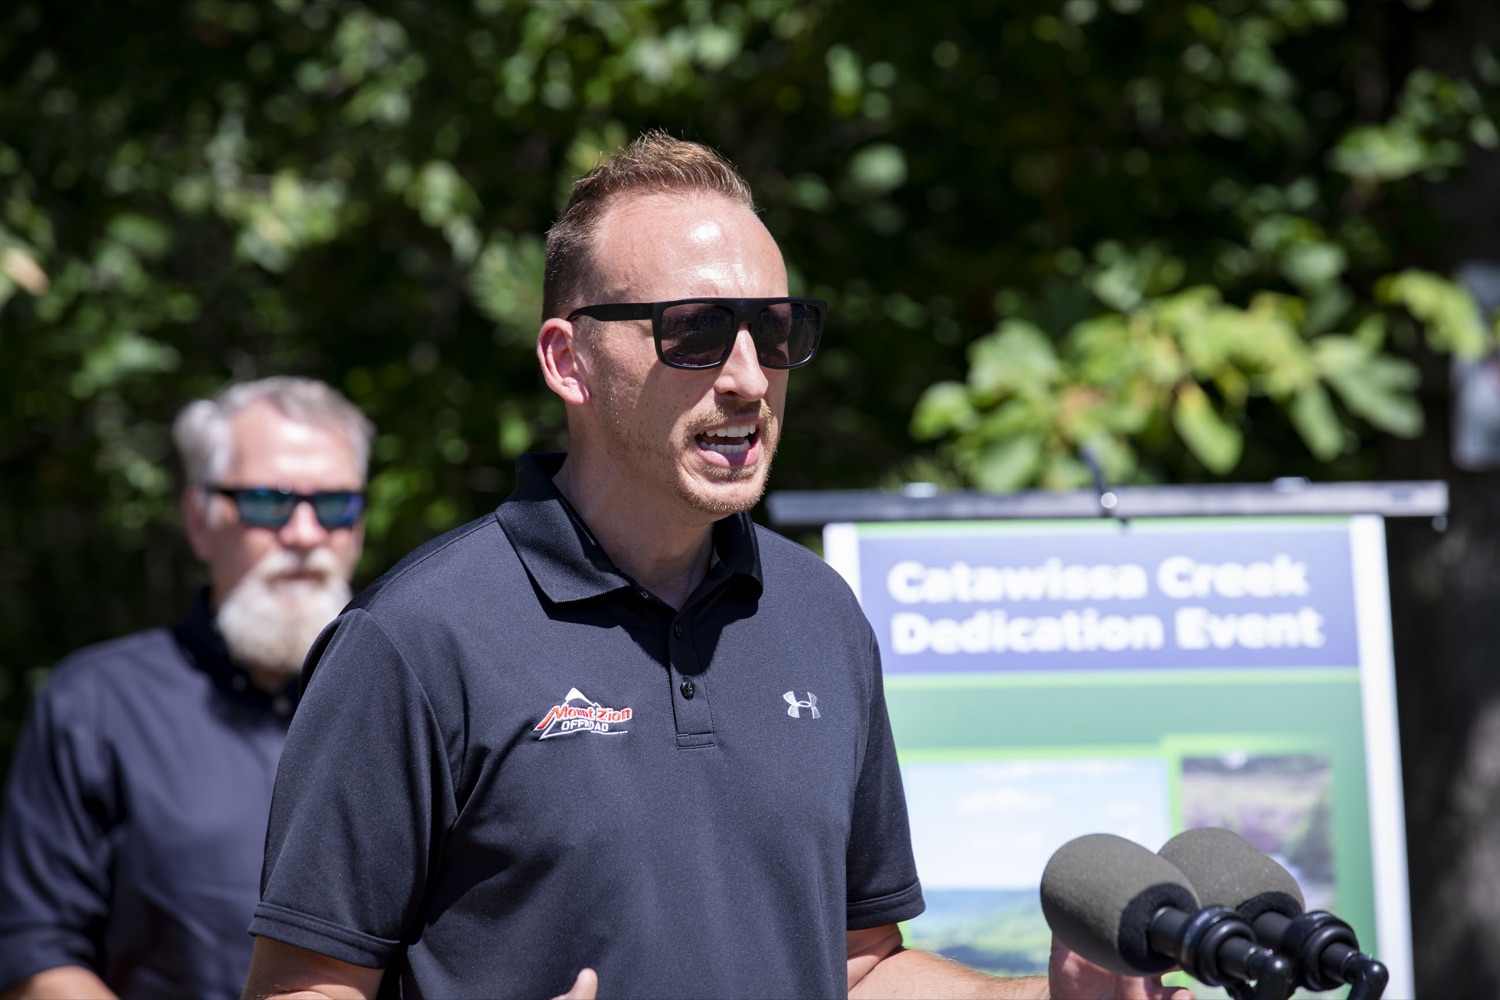 Mike Cashman of Mount Zion Offroad discusses the acquisition of a 5,600-acre tract of land that will be developed into a new motorized recreation area, in McAdoo, PA on August 12, 2022.<br><a href="https://filesource.amperwave.net/commonwealthofpa/photo/22090_dcnr_RecreationArea_24.jpg" target="_blank">⇣ Download Photo</a>